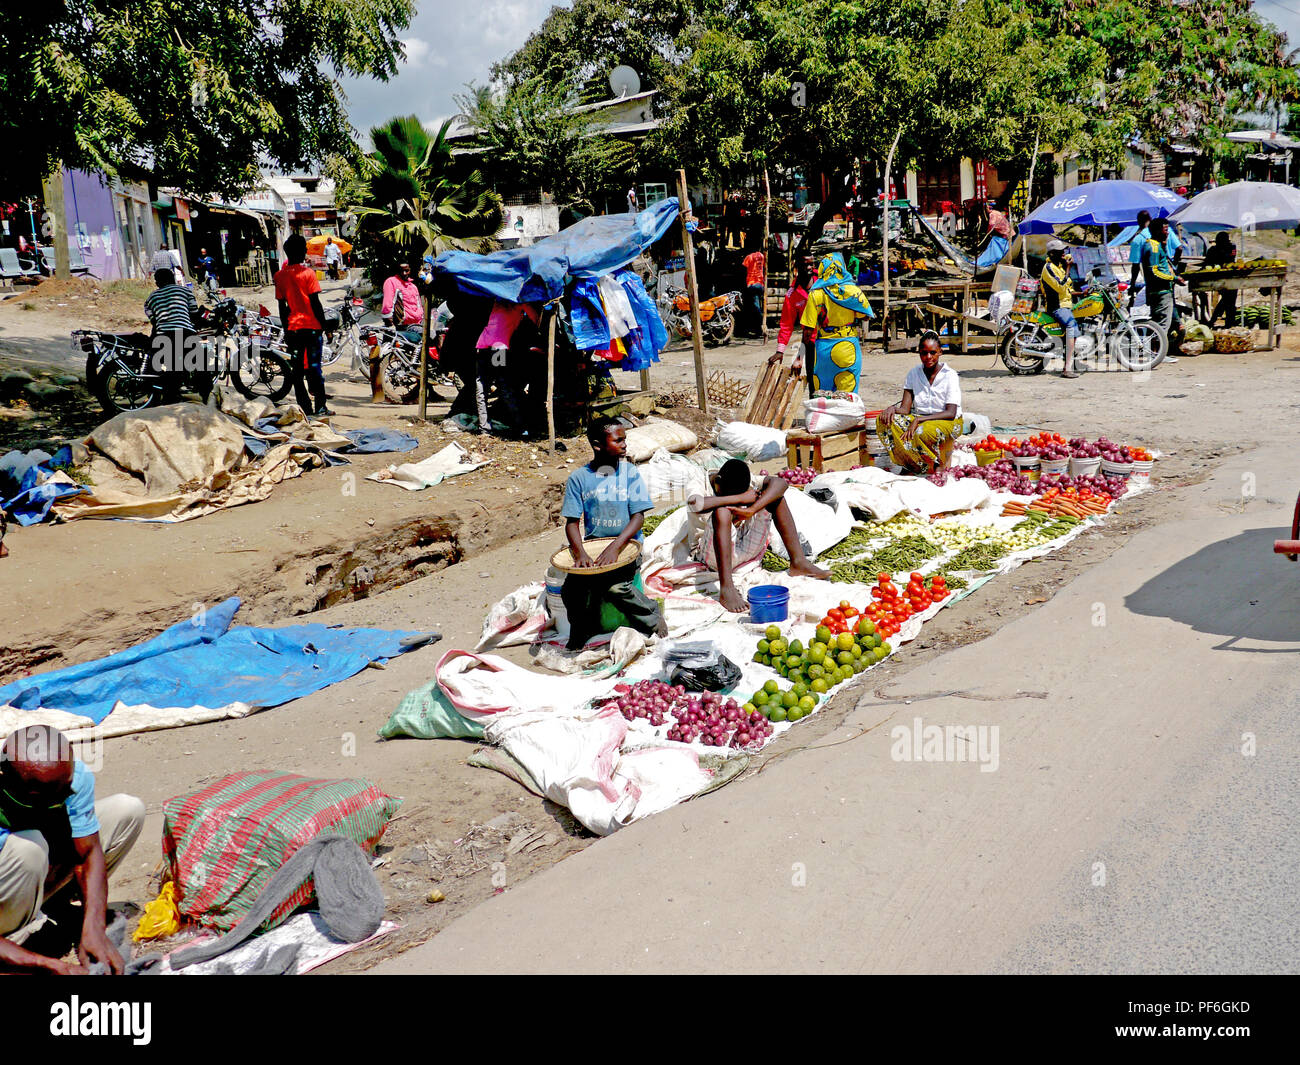 A roadside market in a street in the suburb of Dar es Salaam, Tanazia, Africa Stock Photo